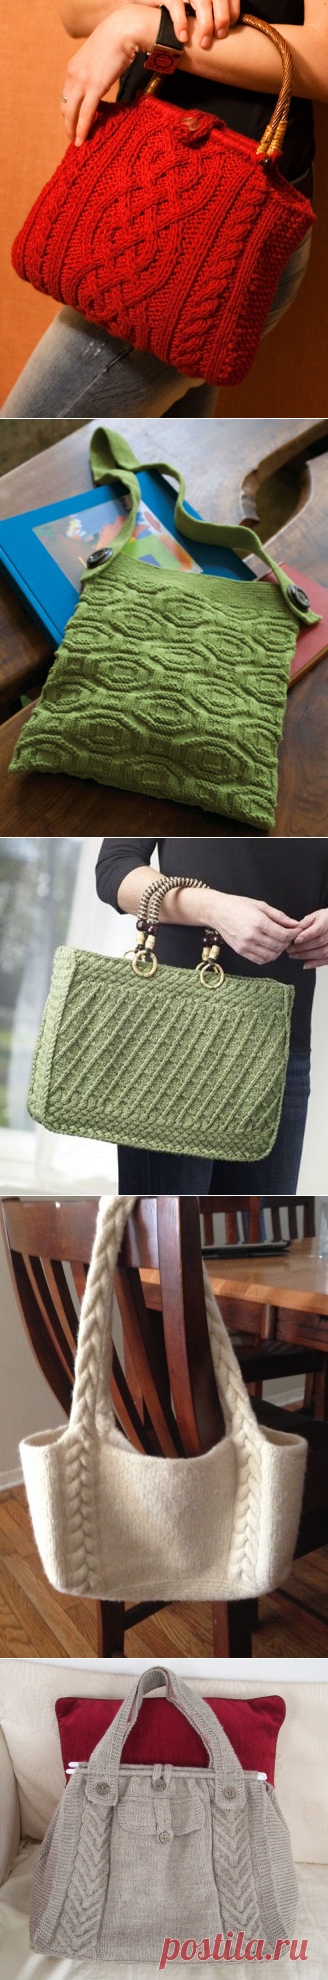 Purse Knitting Patterns | In the Loop Knitting